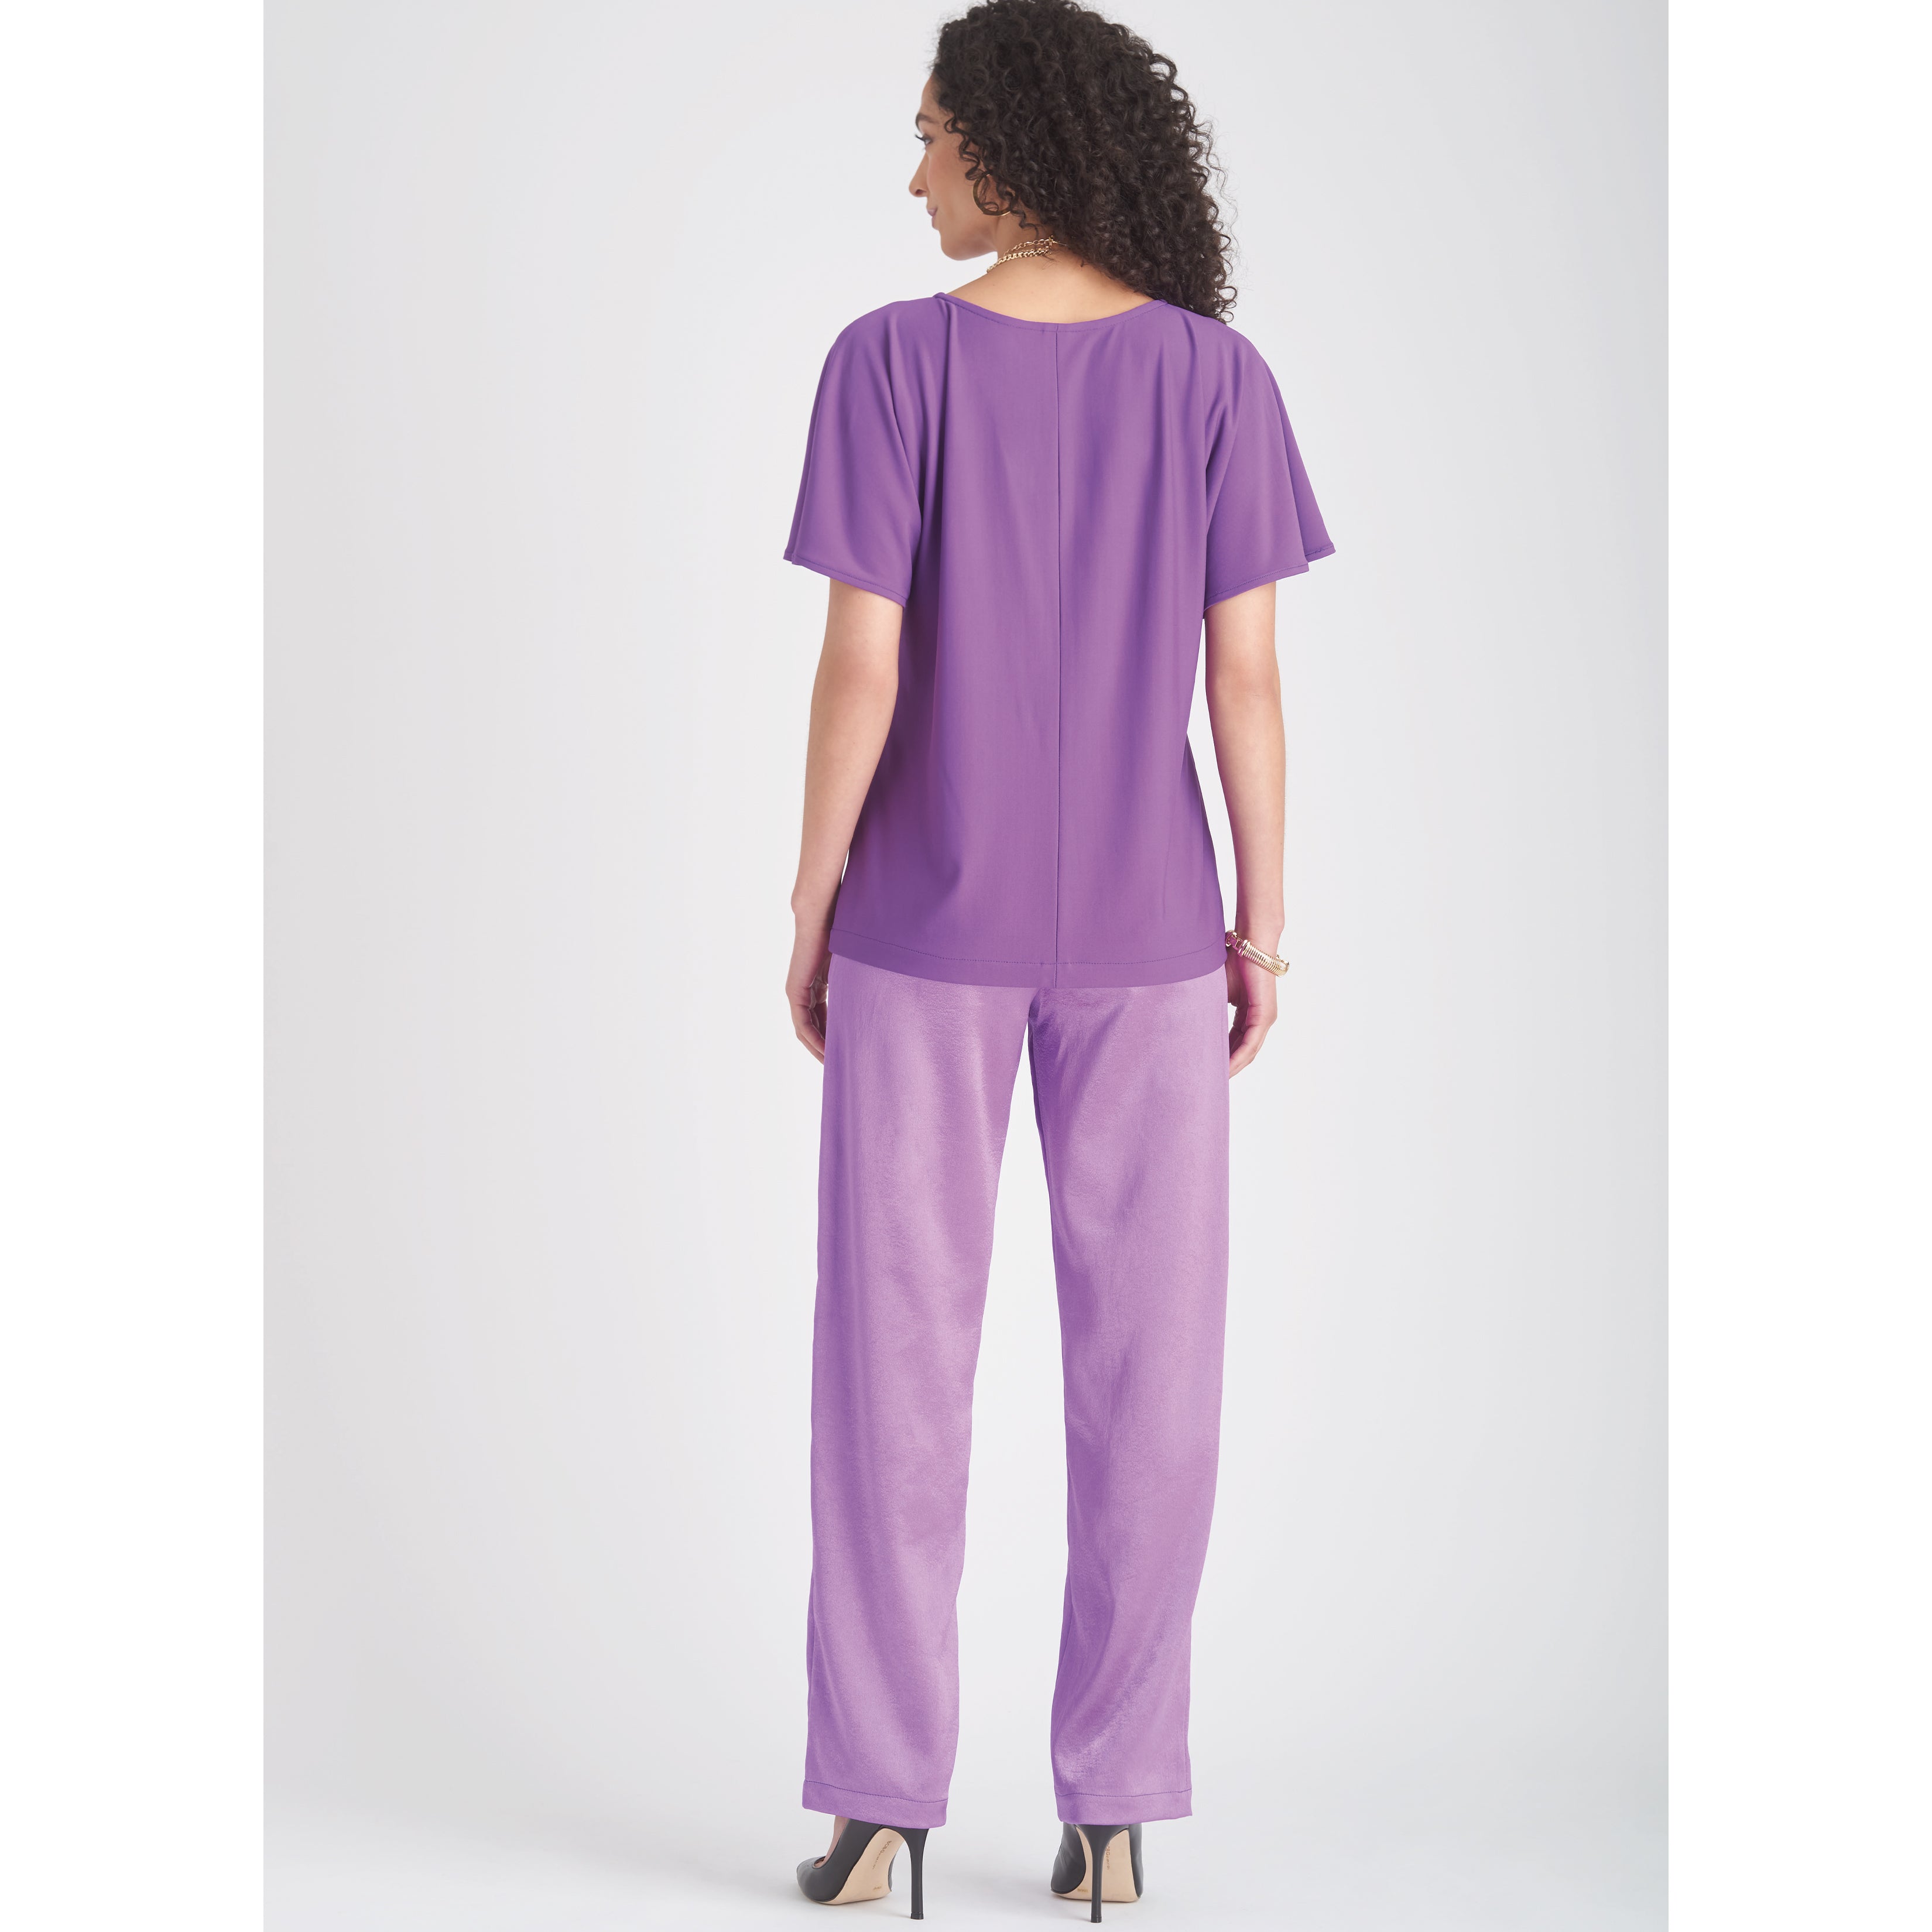 Simplicity pattern 9690 Misses' Tops and Pull-On Pants from Jaycotts Sewing Supplies